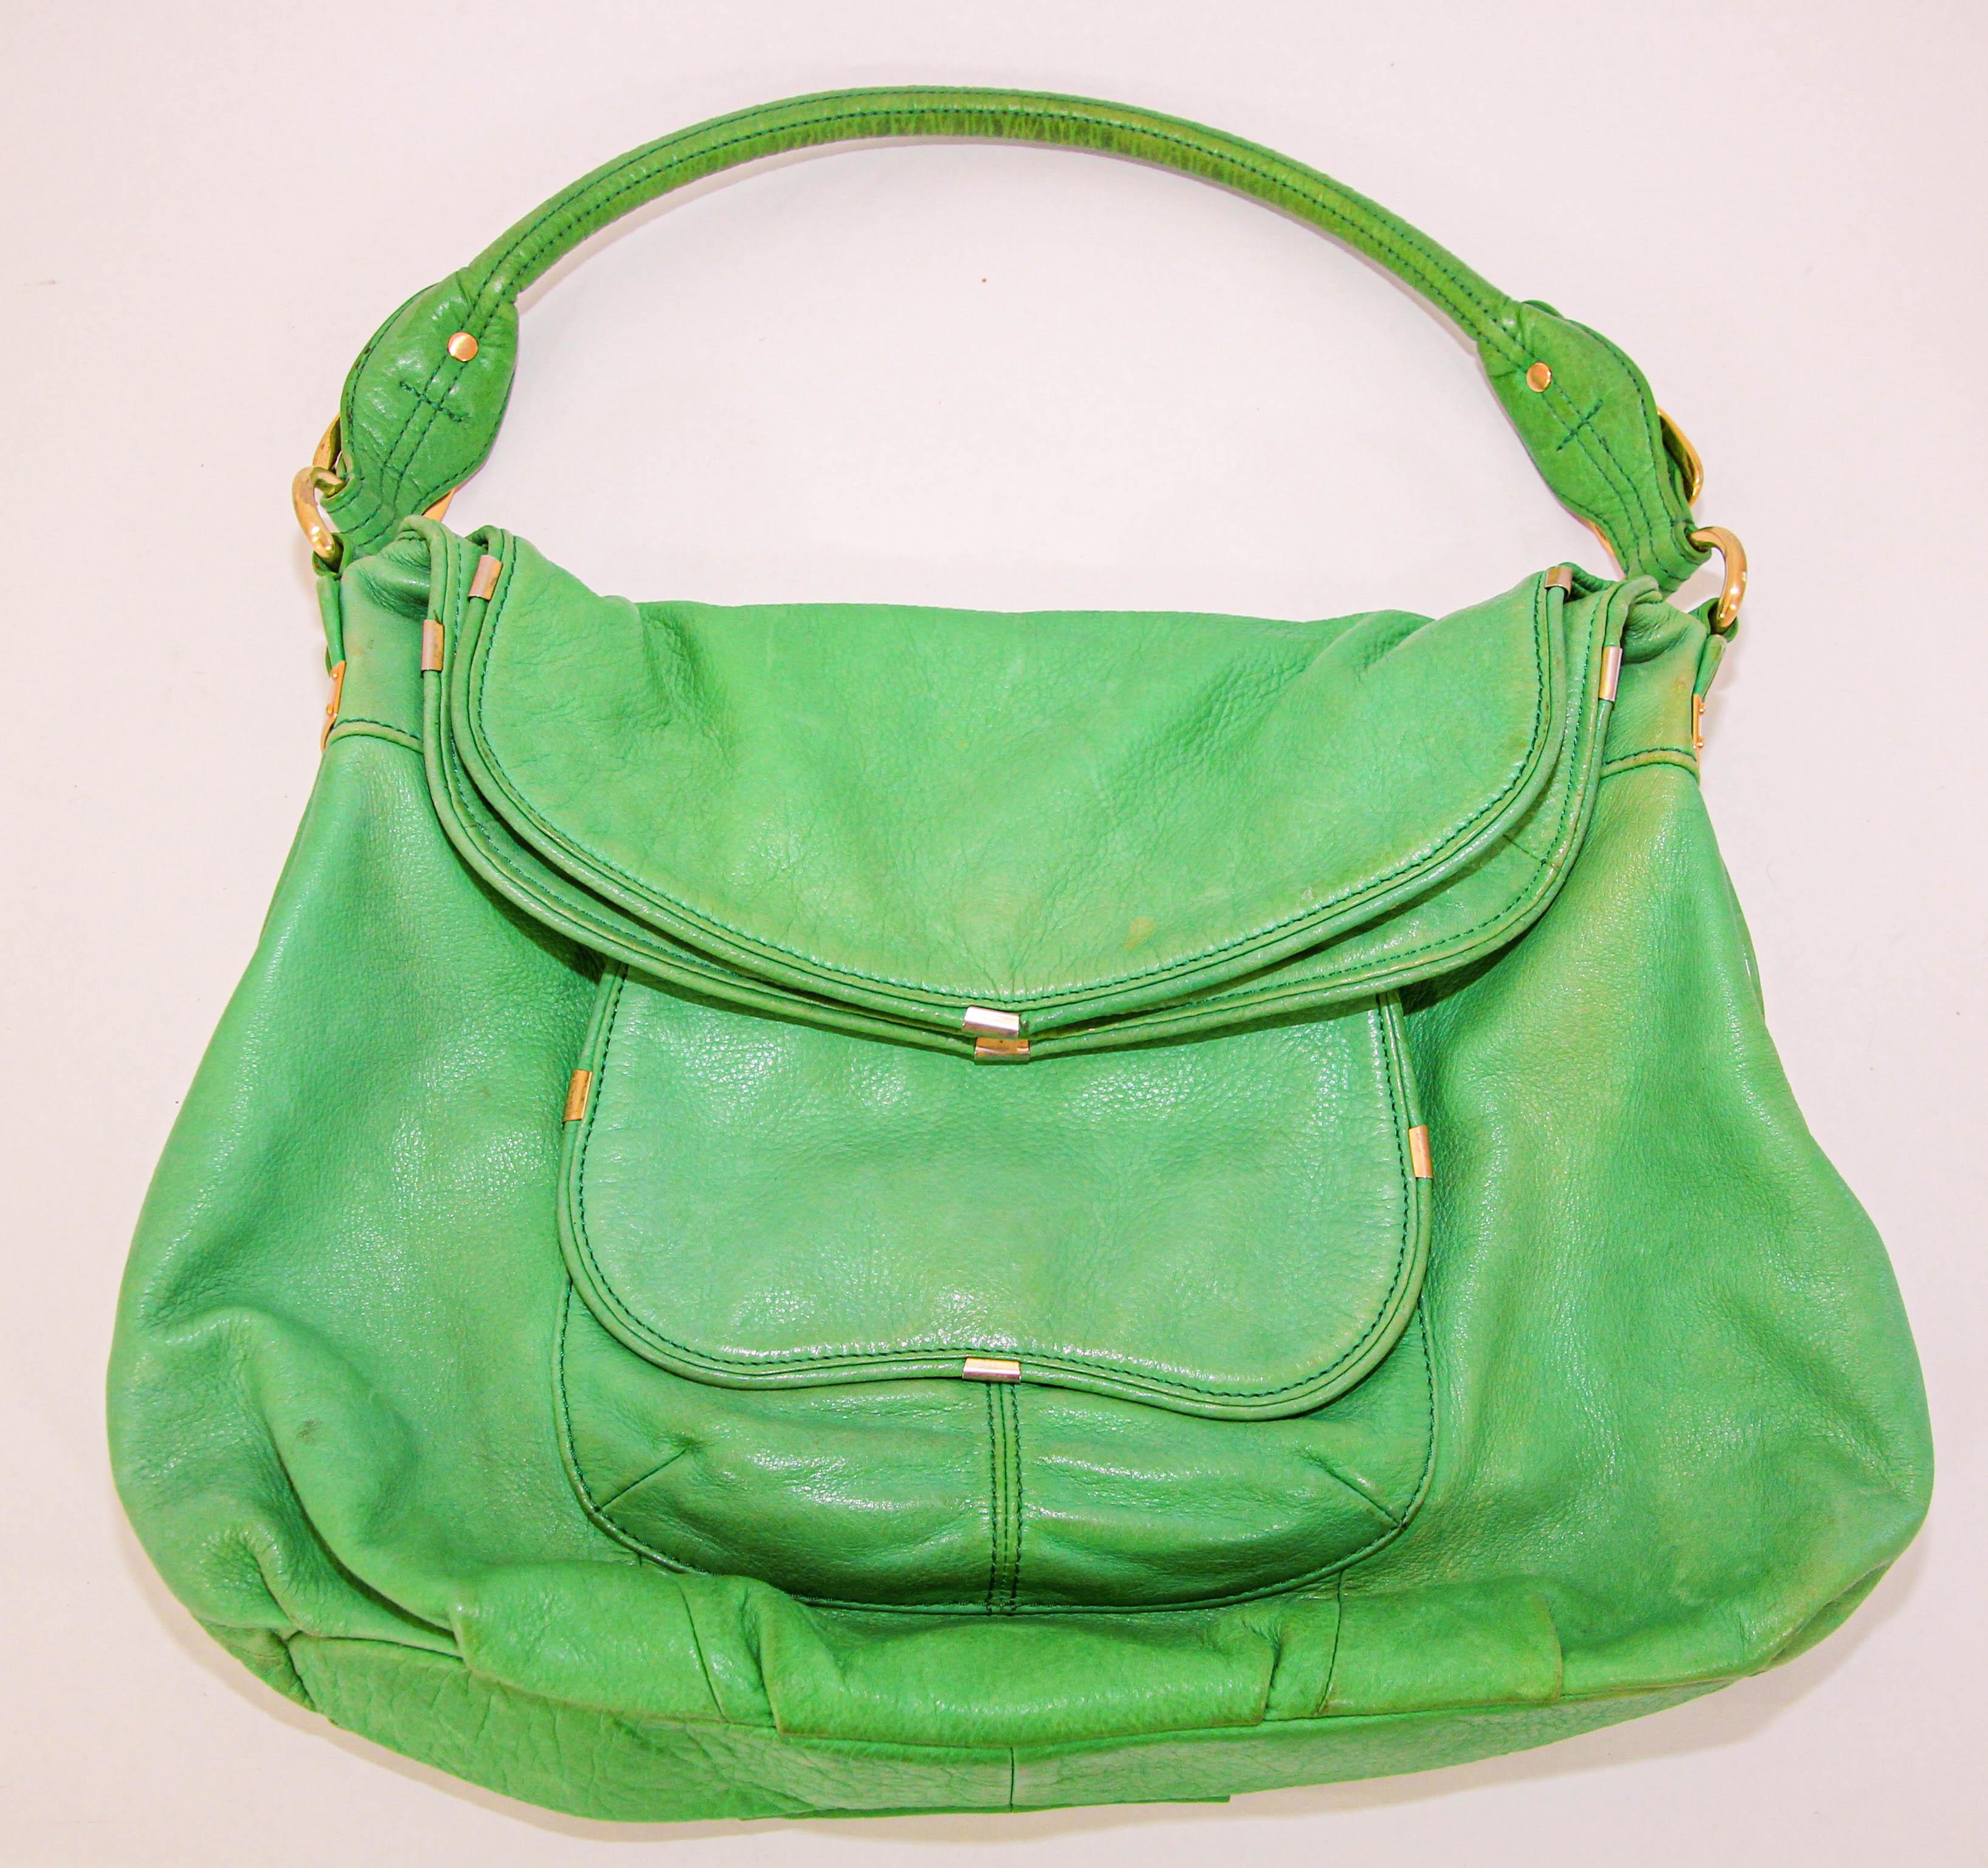 B. Makowsky green leather shoulder bag with gold brass hardware and logo..
Fabulous lime green vintage B. MAKOWSKY leather shoulder Hobo bag with multiple pockets and interior lining in leopard print.
As with pre-owned items, some wear and signs of